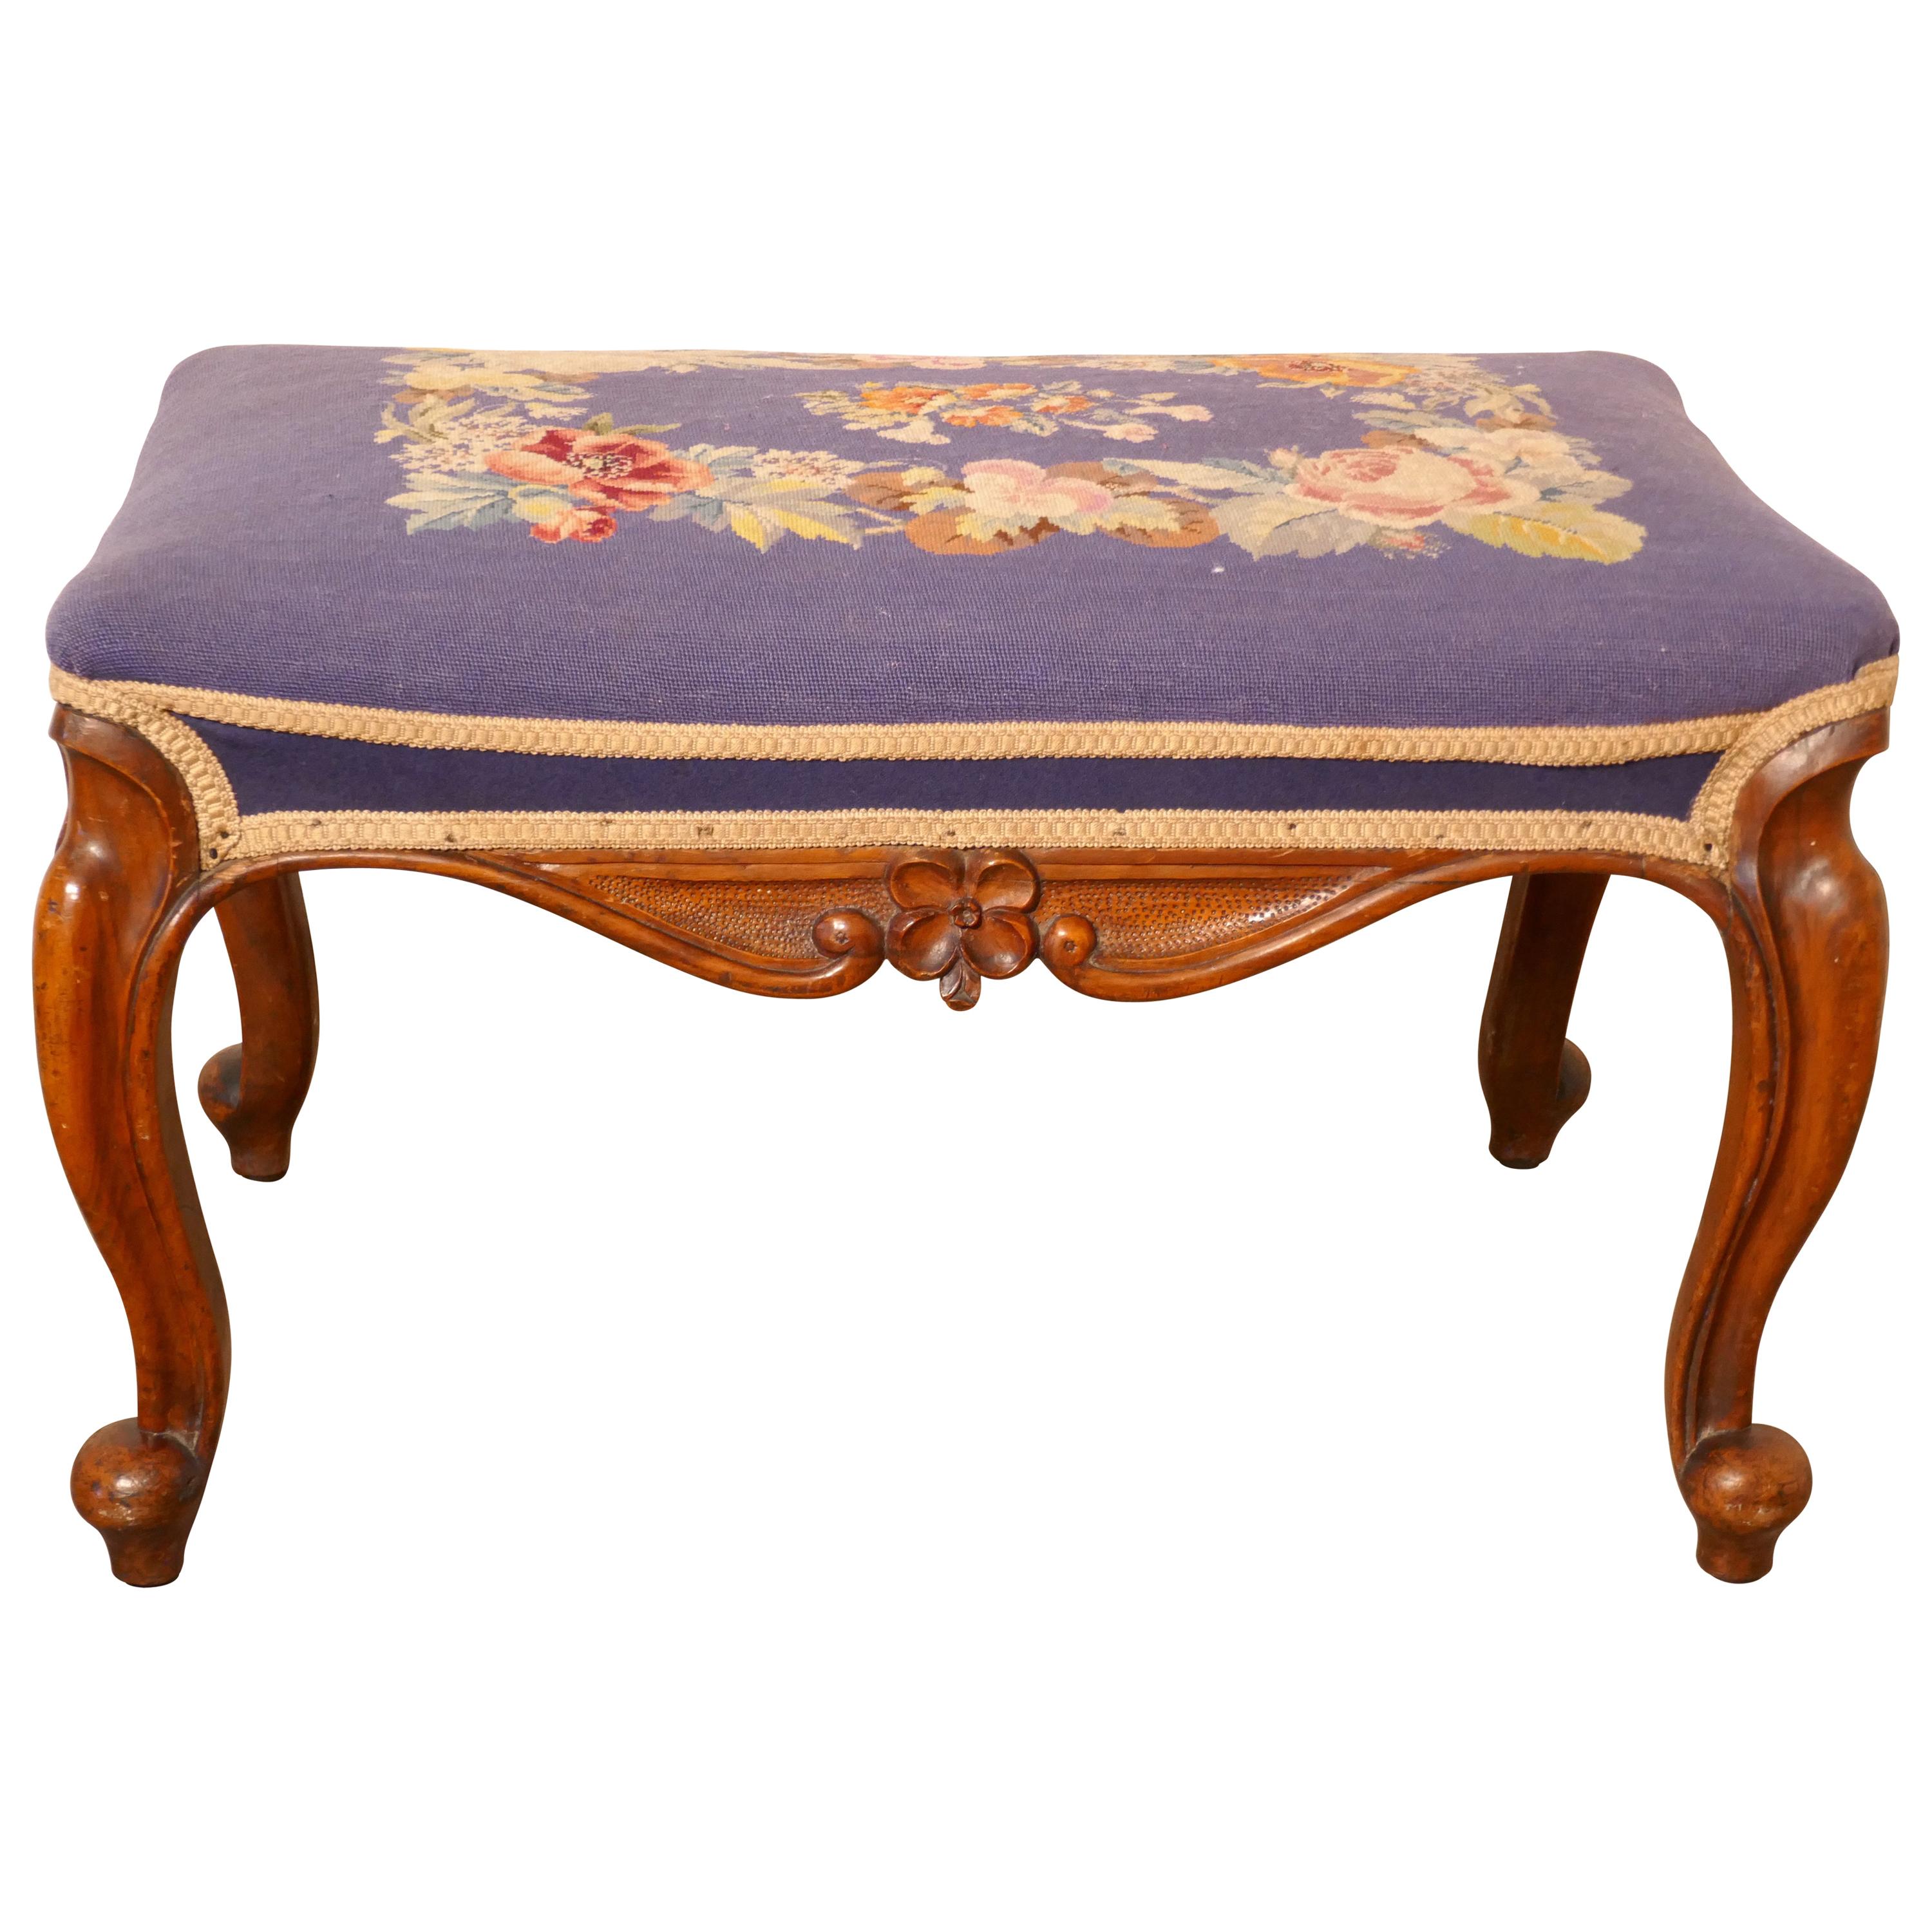 Victorian Petit Point Tapestry Upholstered Mahogany Stool For Sale